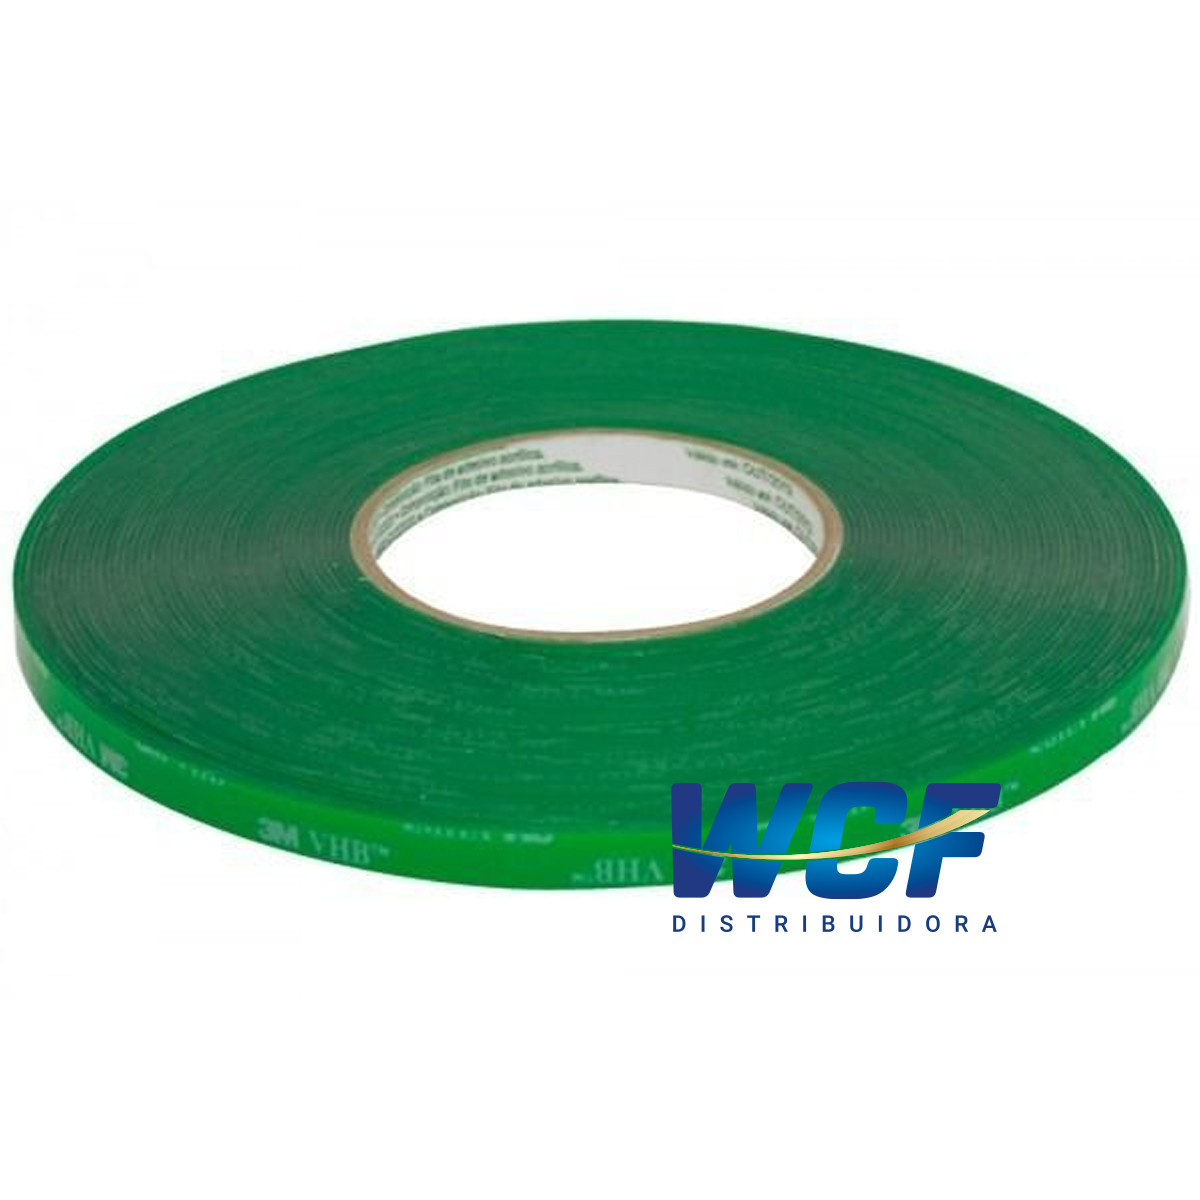 3M FITA DUPLA FACE VERDE 5 MM X 20 MTS